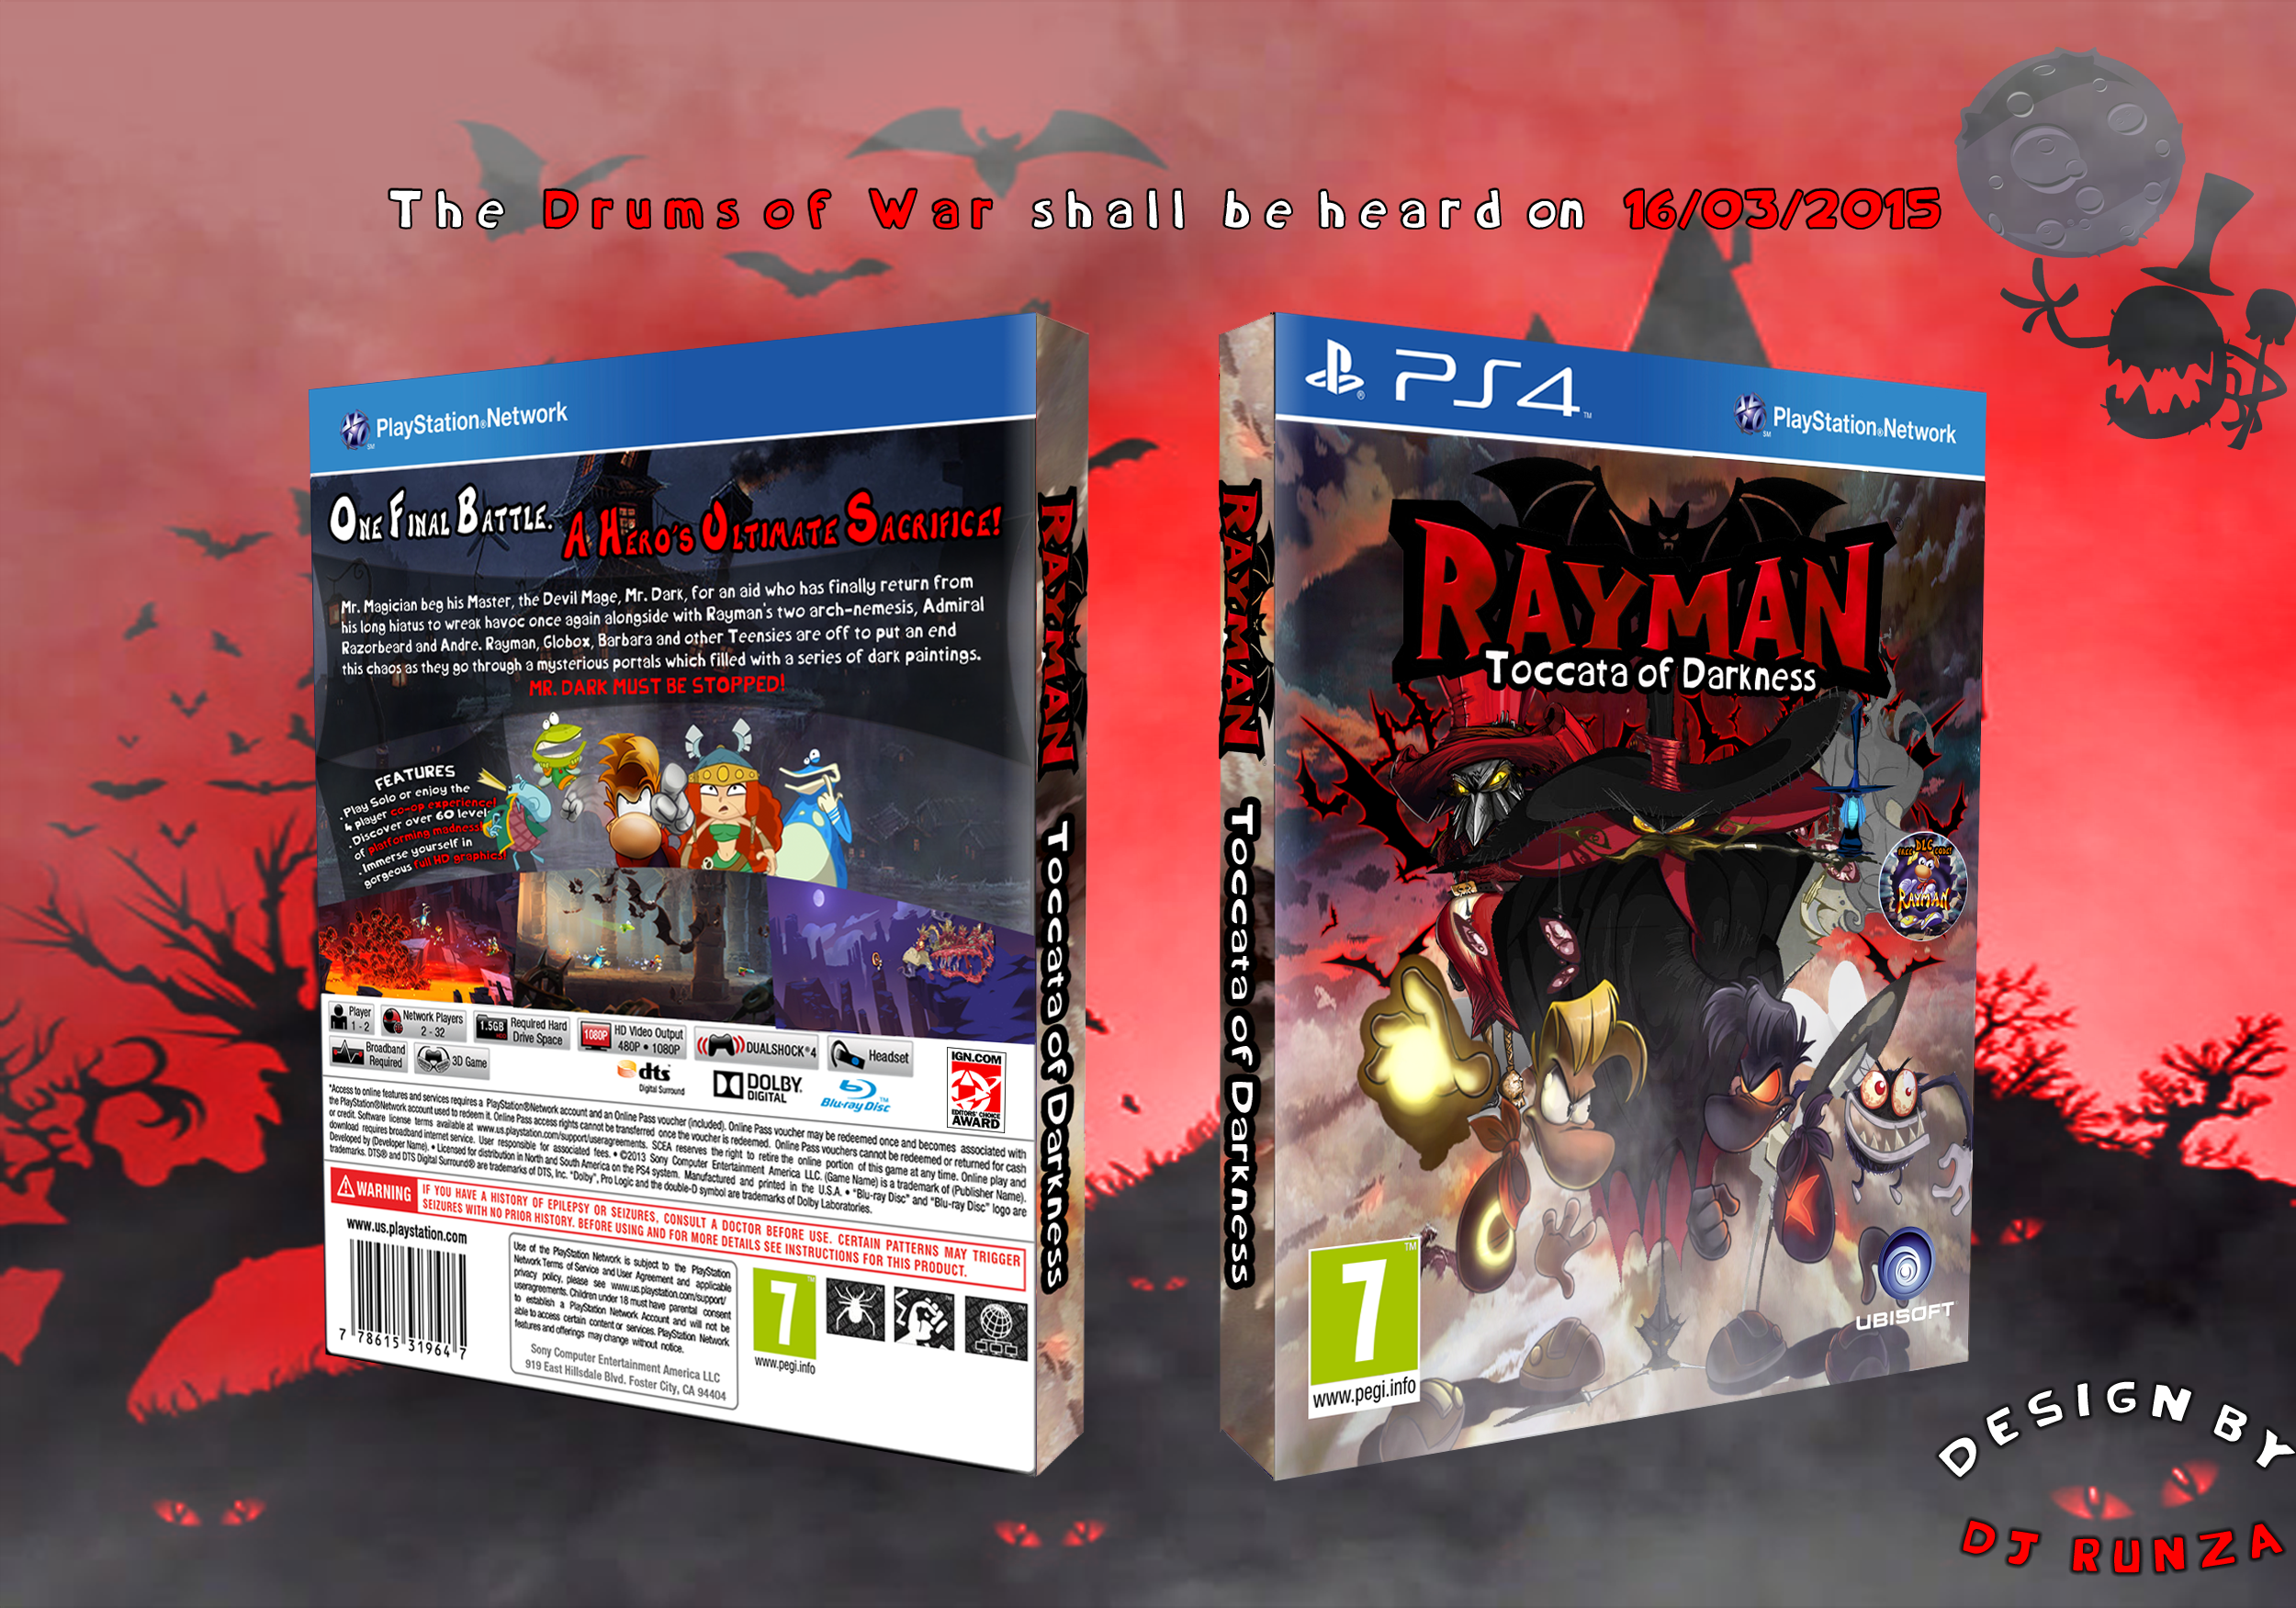 Rayman: Toccata of Darkness box cover